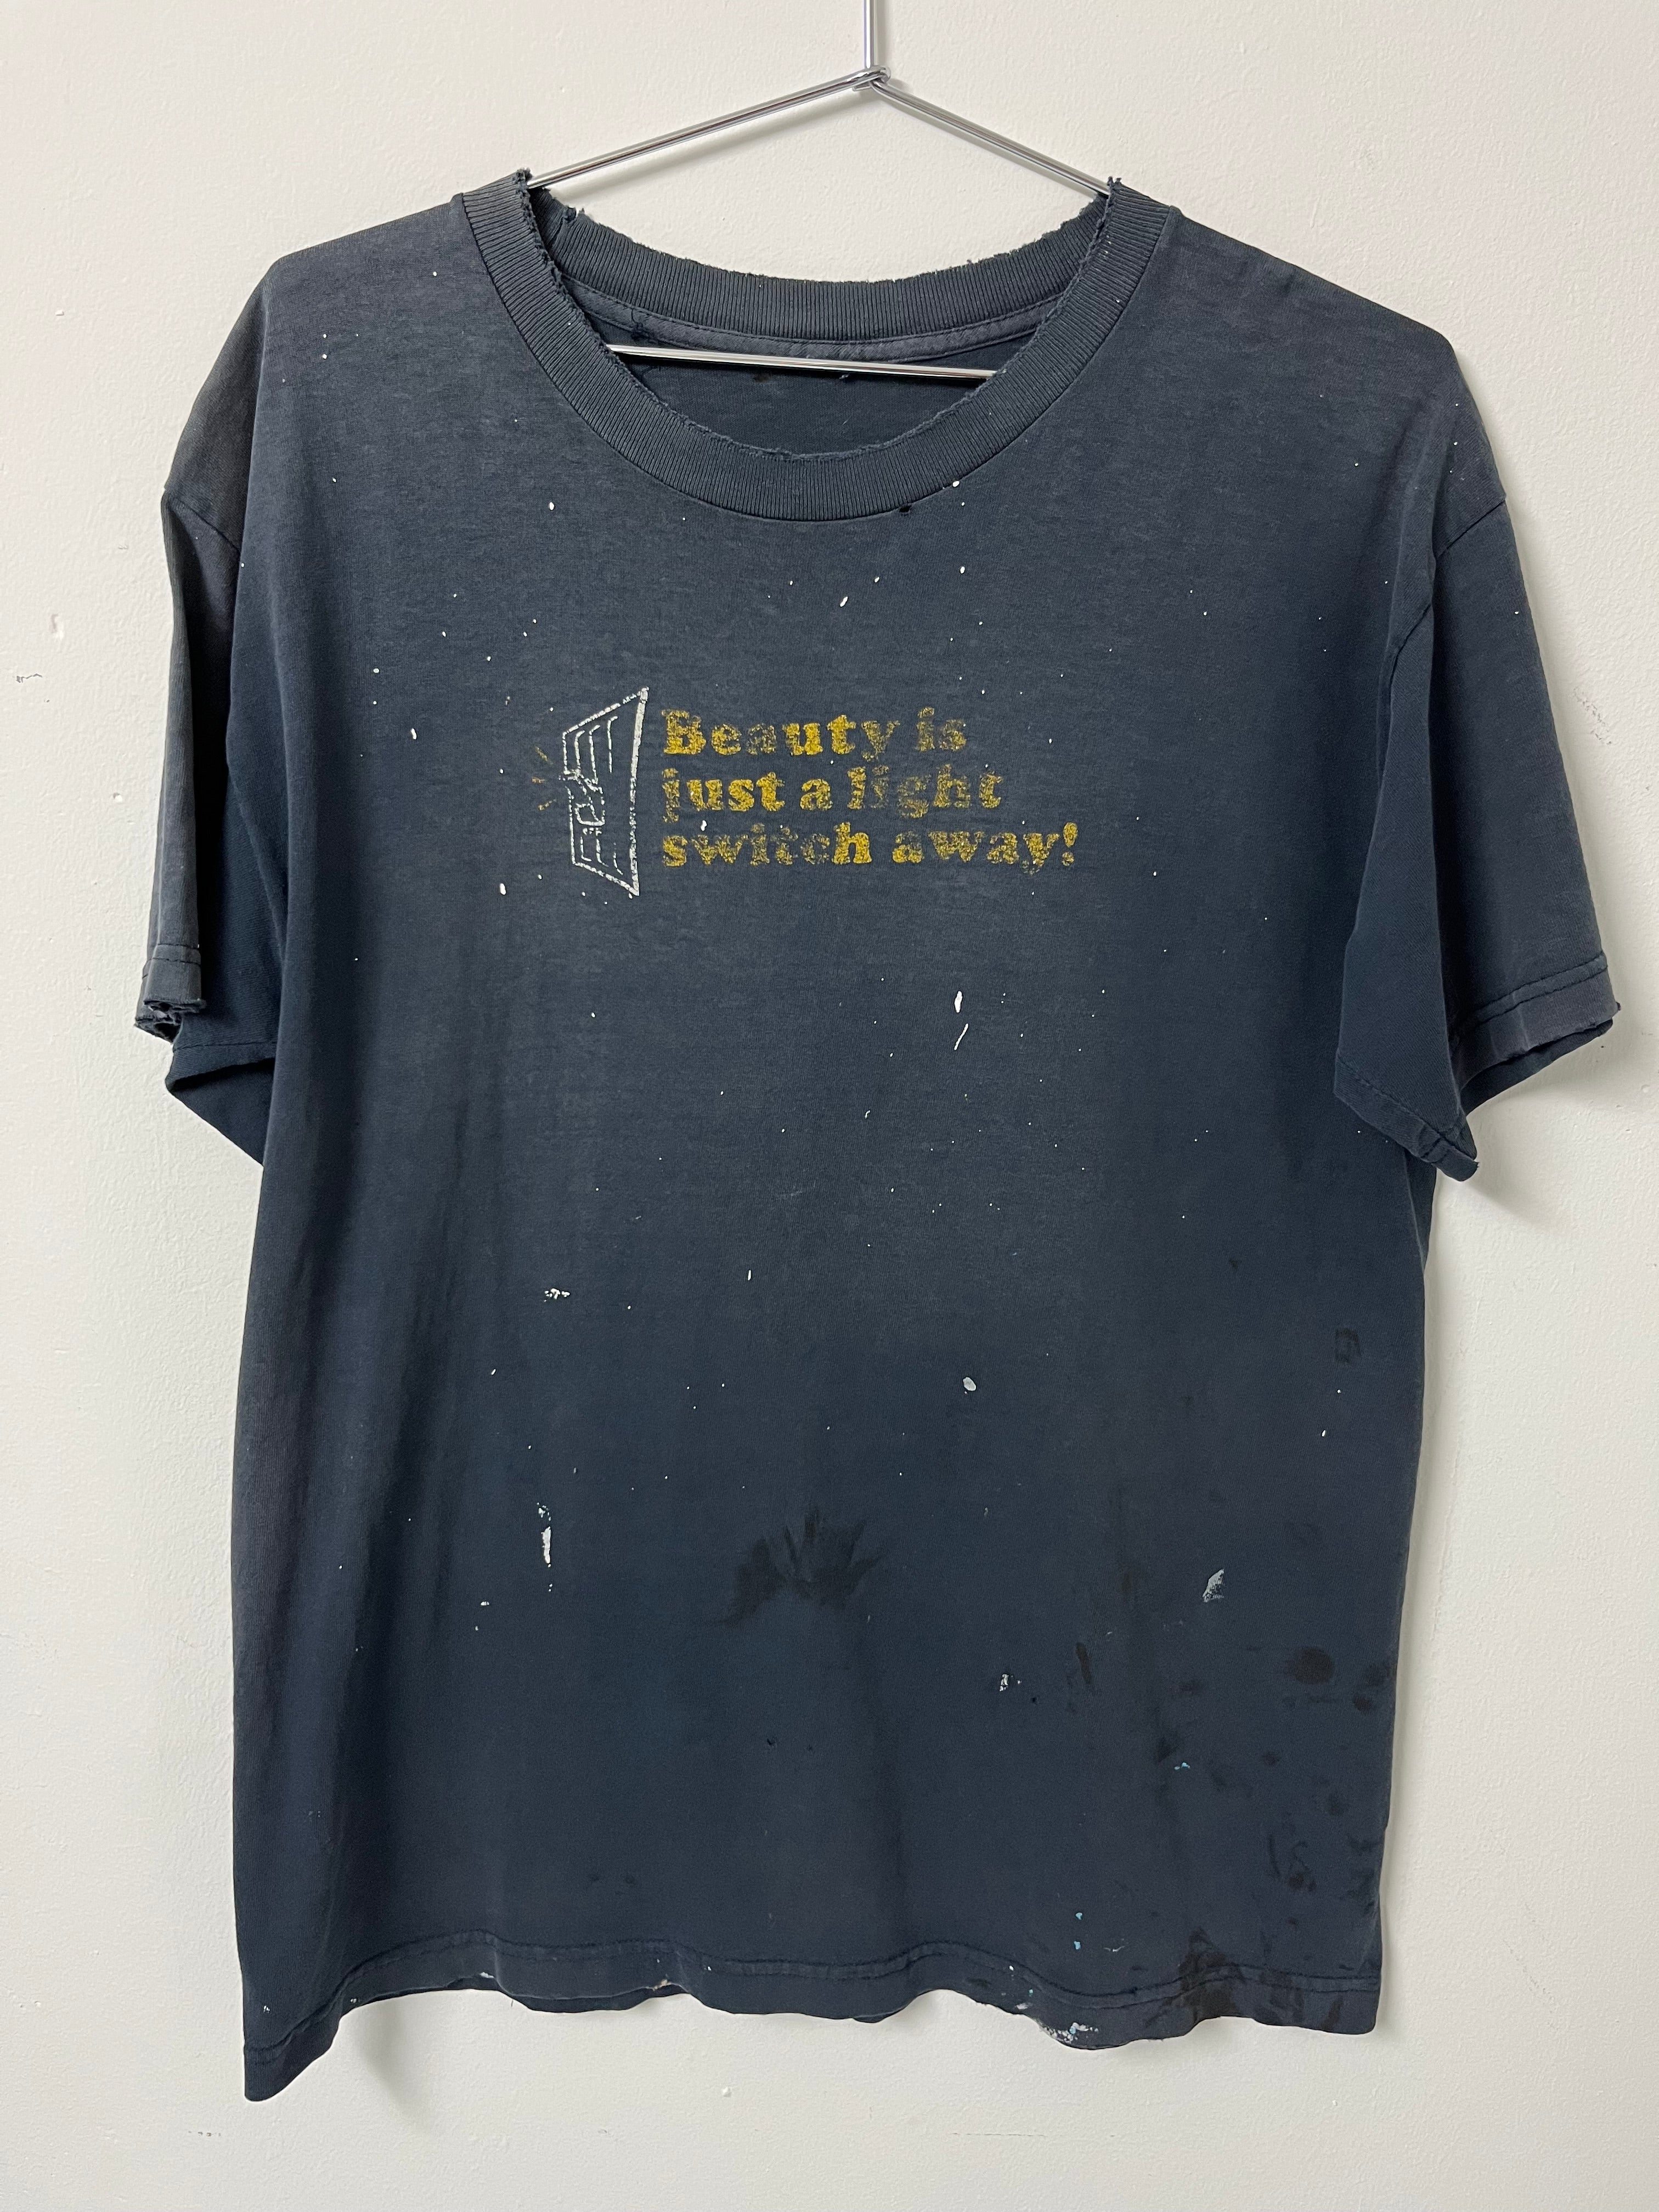 90s/‘00s ‘Beauty is Just a Light Switch Away’ Thrashed T-Shirt - Sun Faded Navy - XL